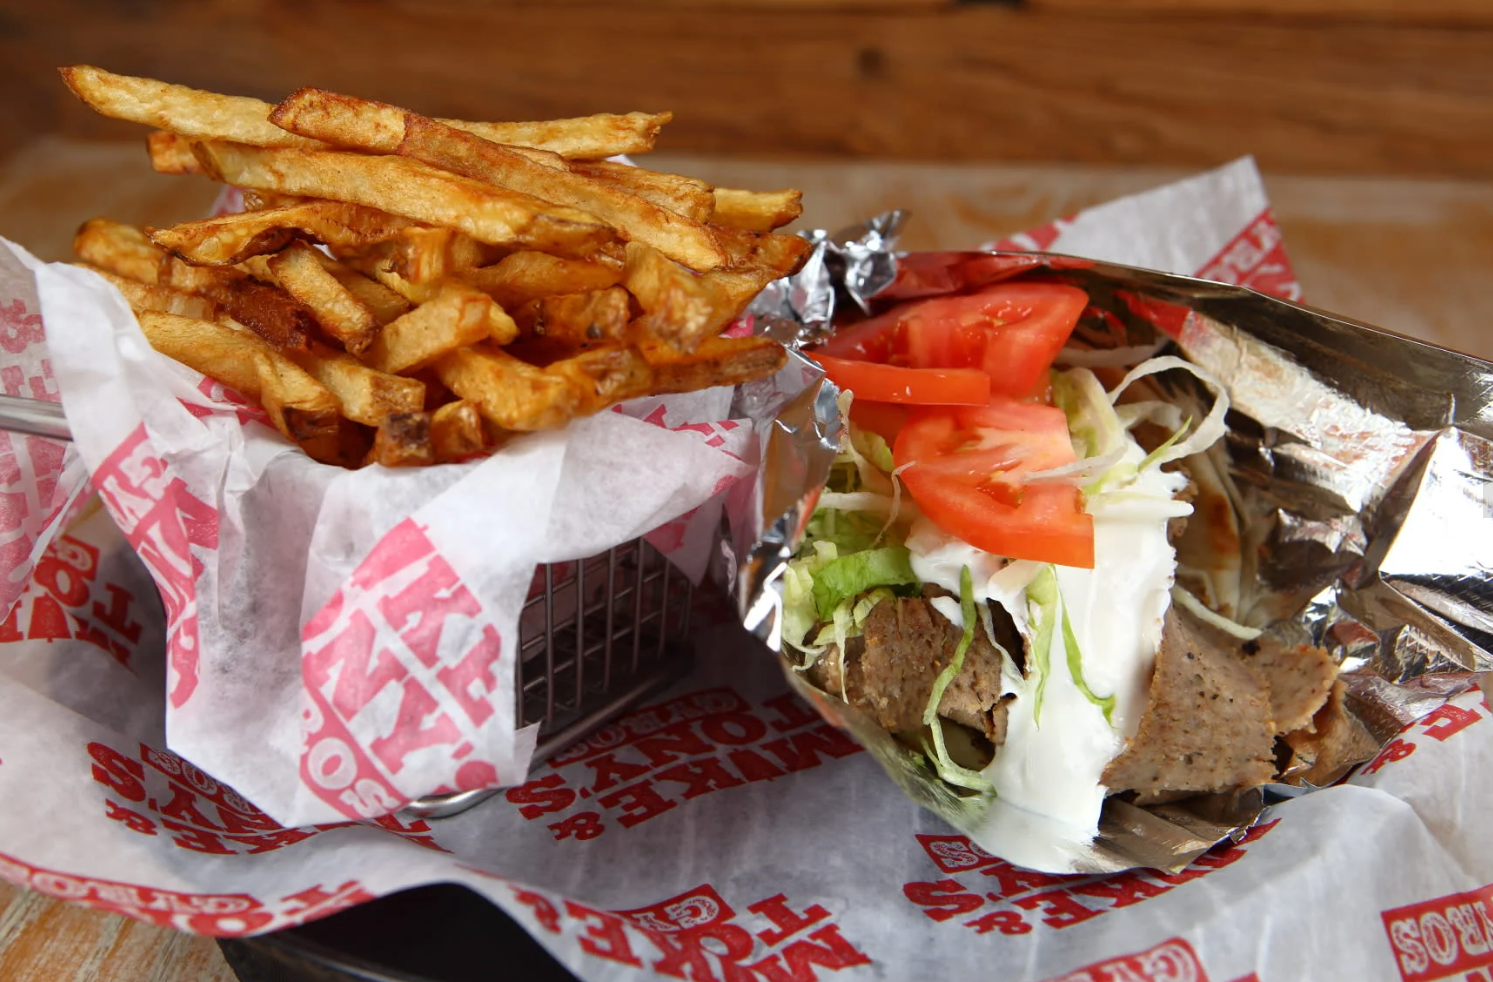 Image of Mike & Tony's Gyro with Fries.